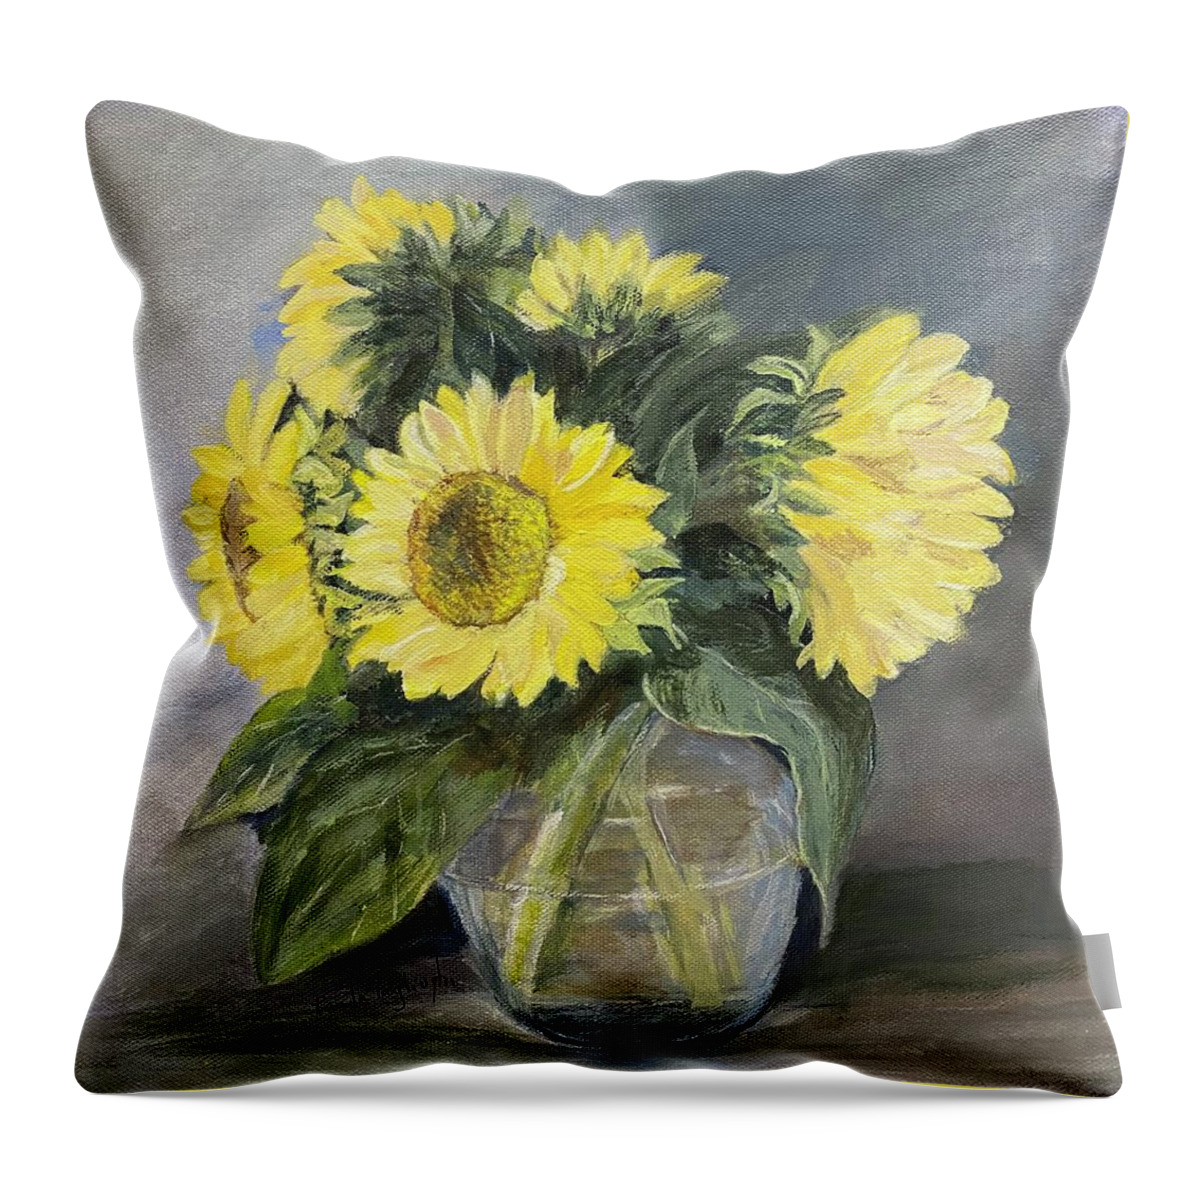 Painting Throw Pillow featuring the painting I Love Sunflowers by Paula Pagliughi